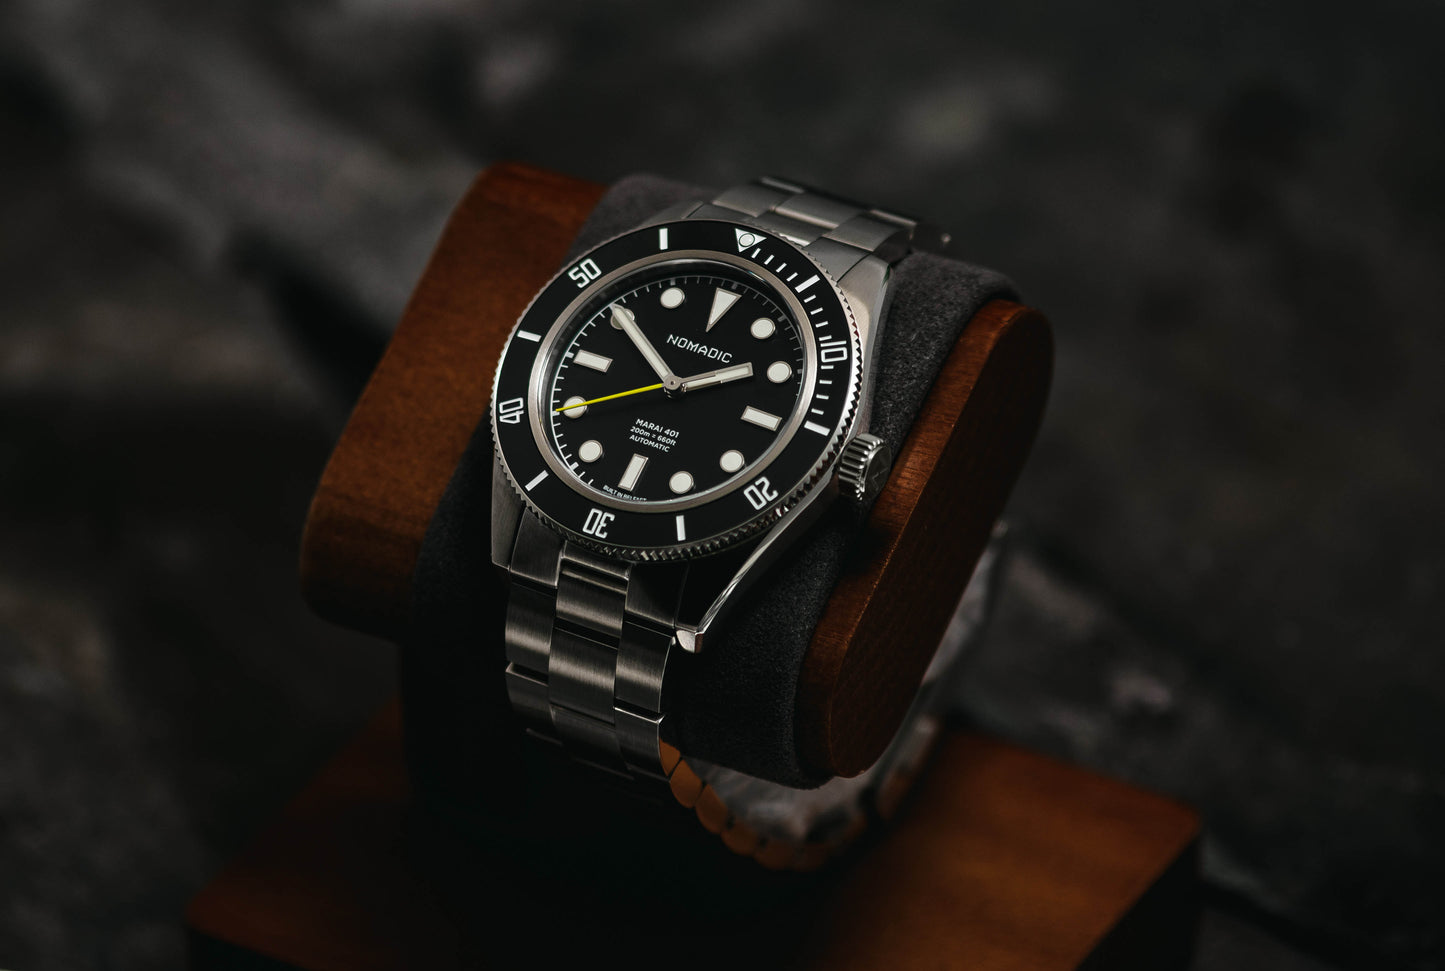 Classic Black and Gold - Maraí 401 - Dive Watch